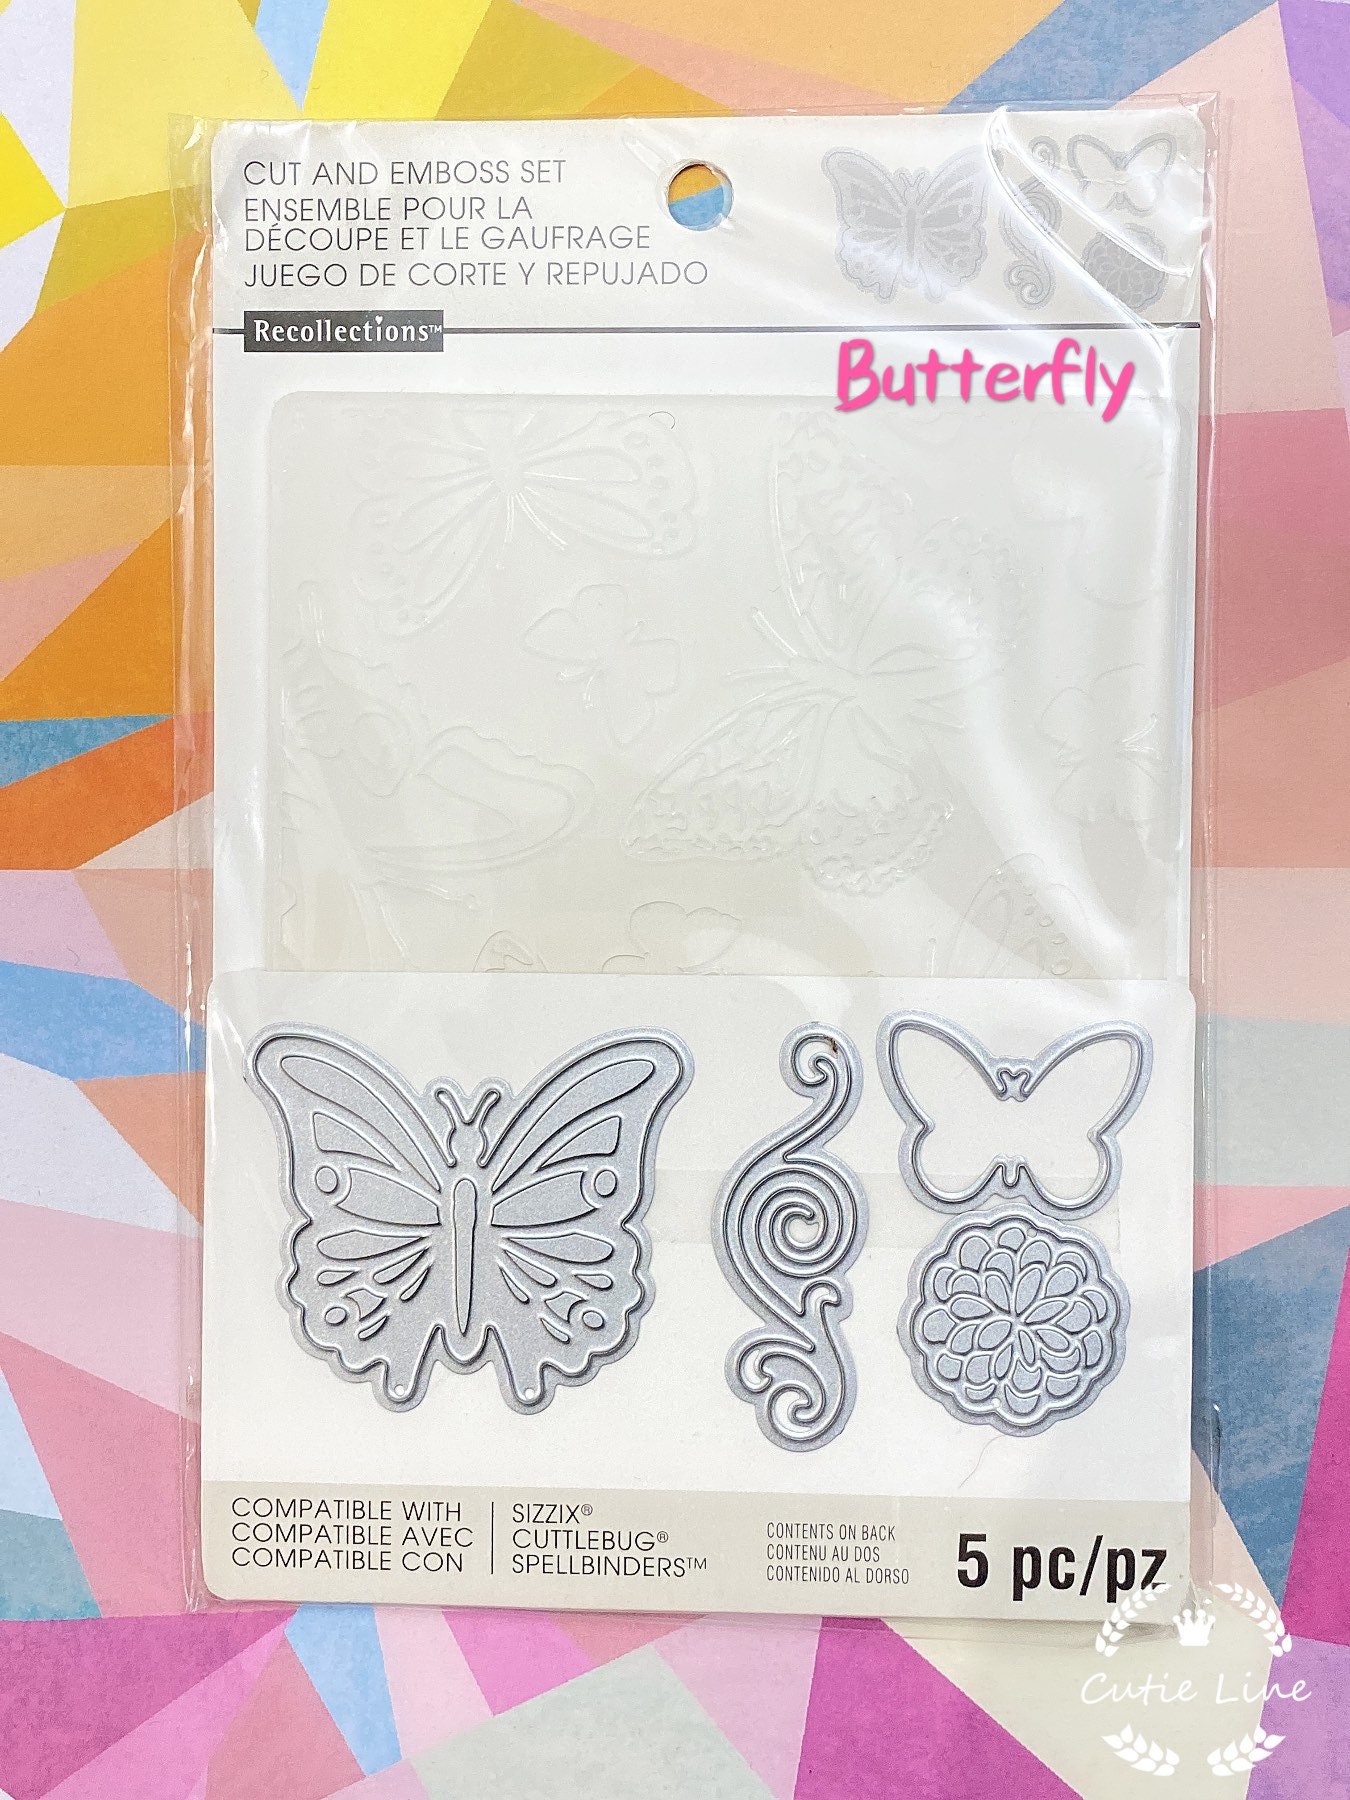 Recollections Embossing Kit – Product Review